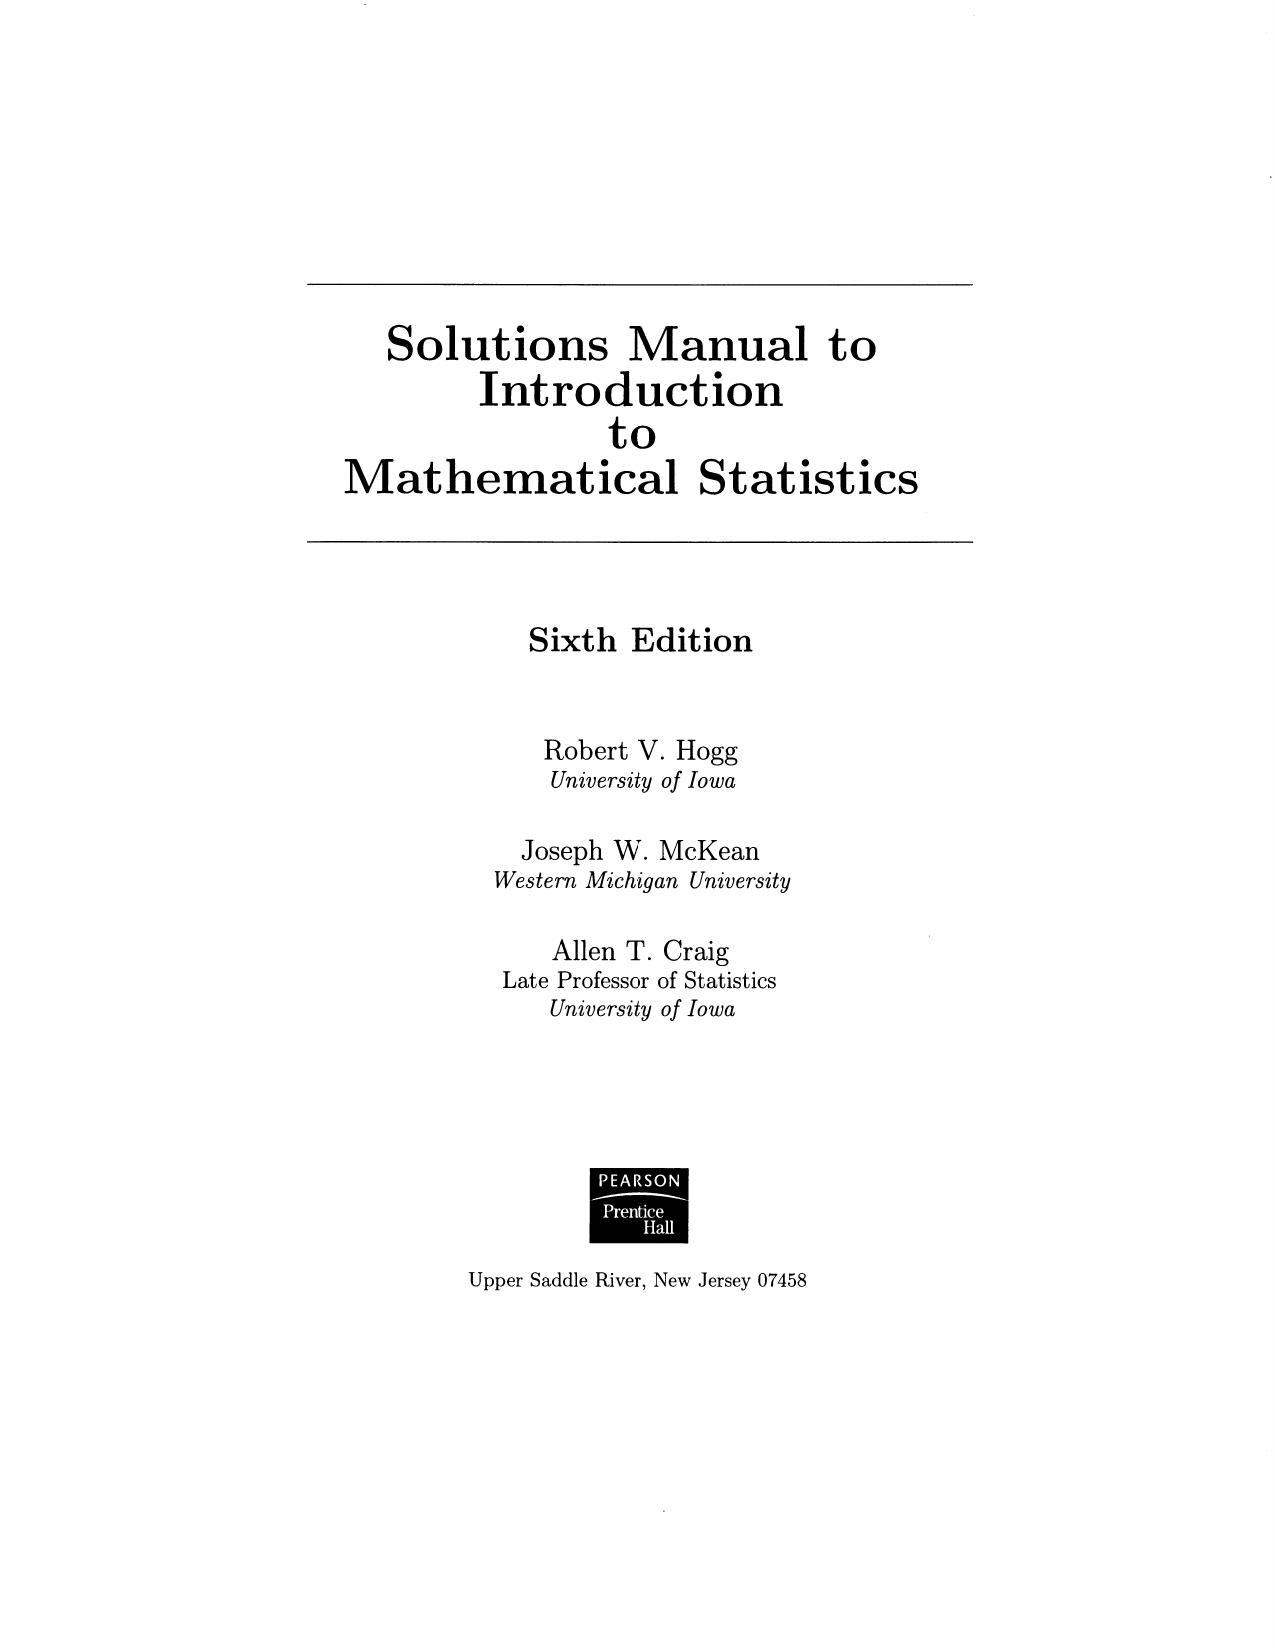 Solution Manual to Introduction to Mathematical Statistics, 6th Edition